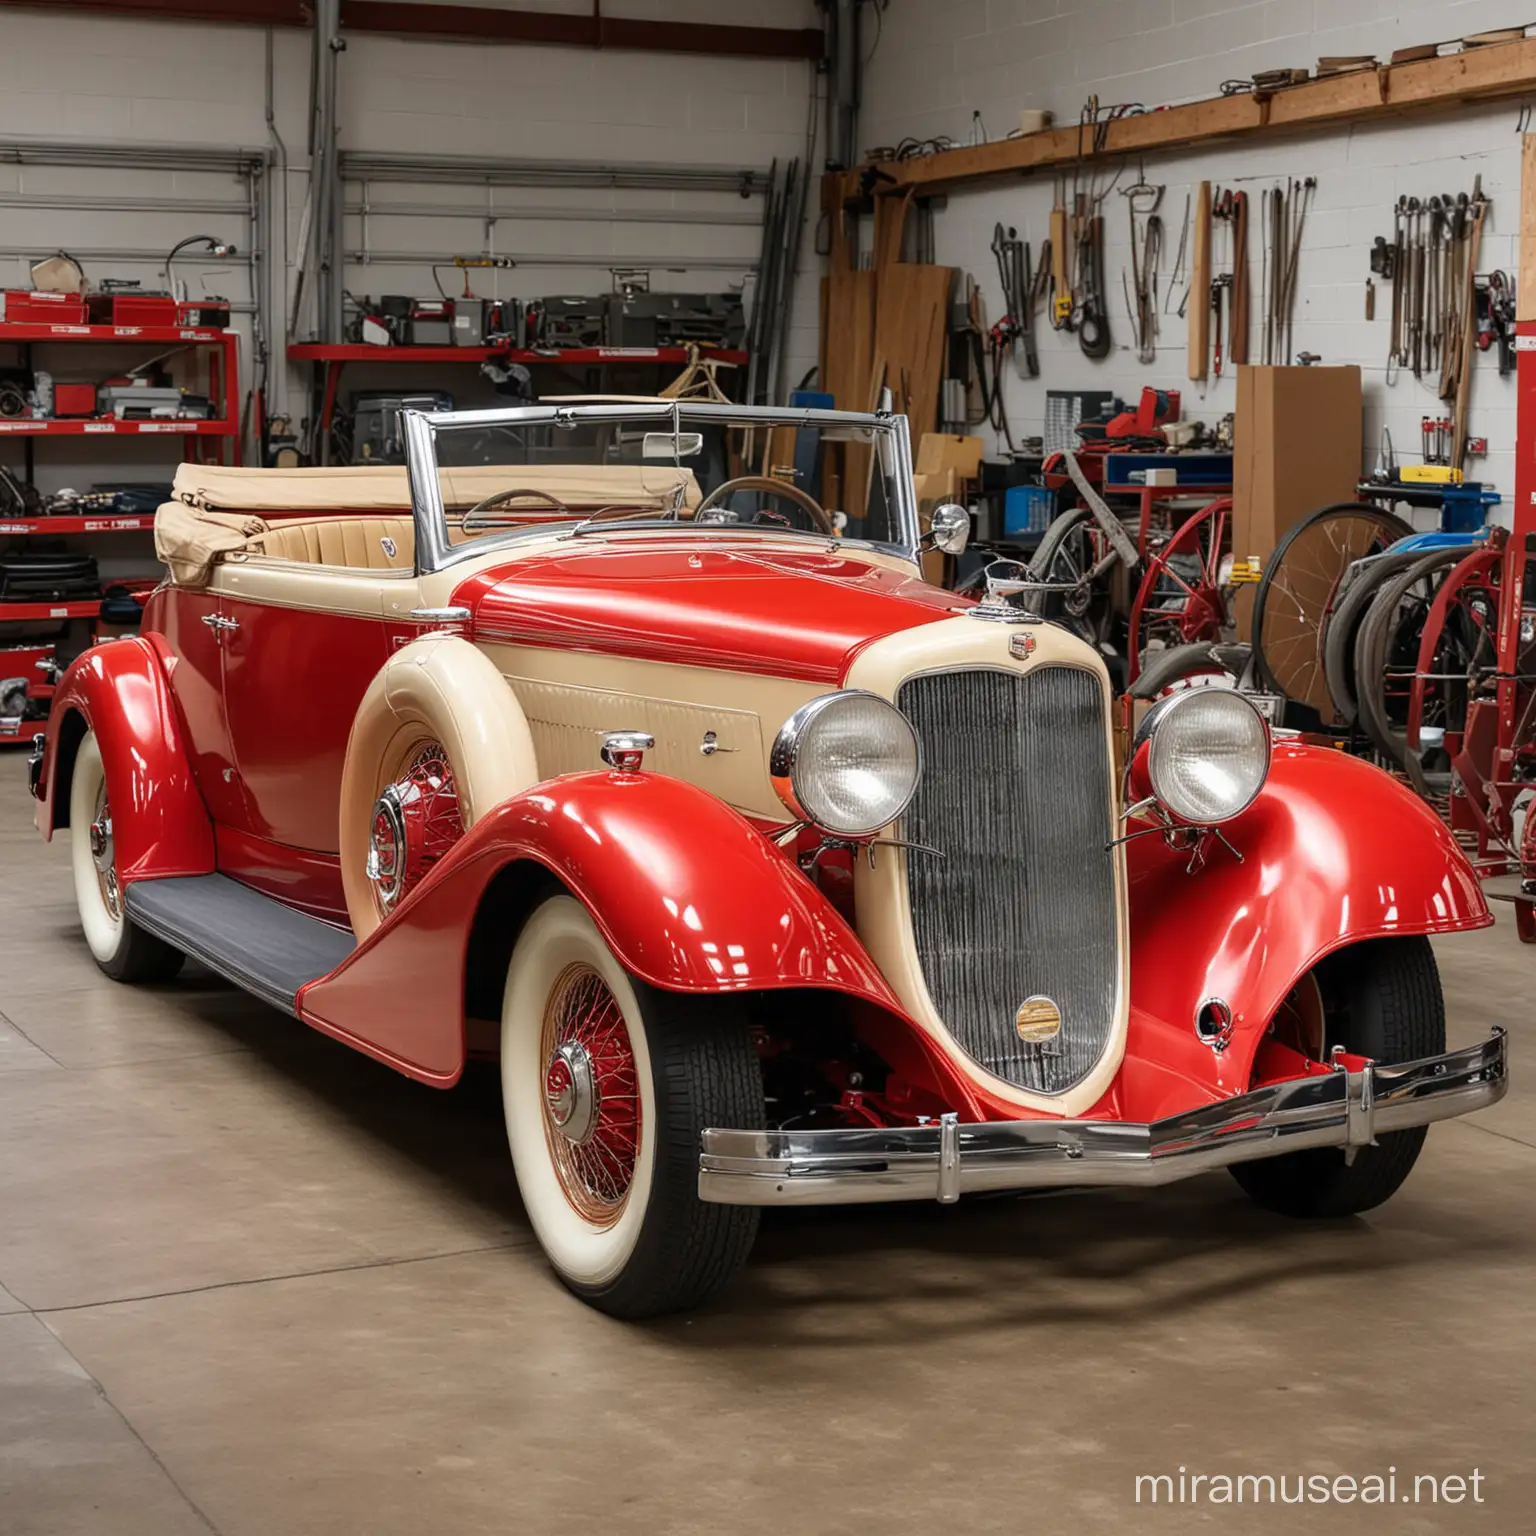 Classic Red and Cream Cadillac Convertible in Workshop